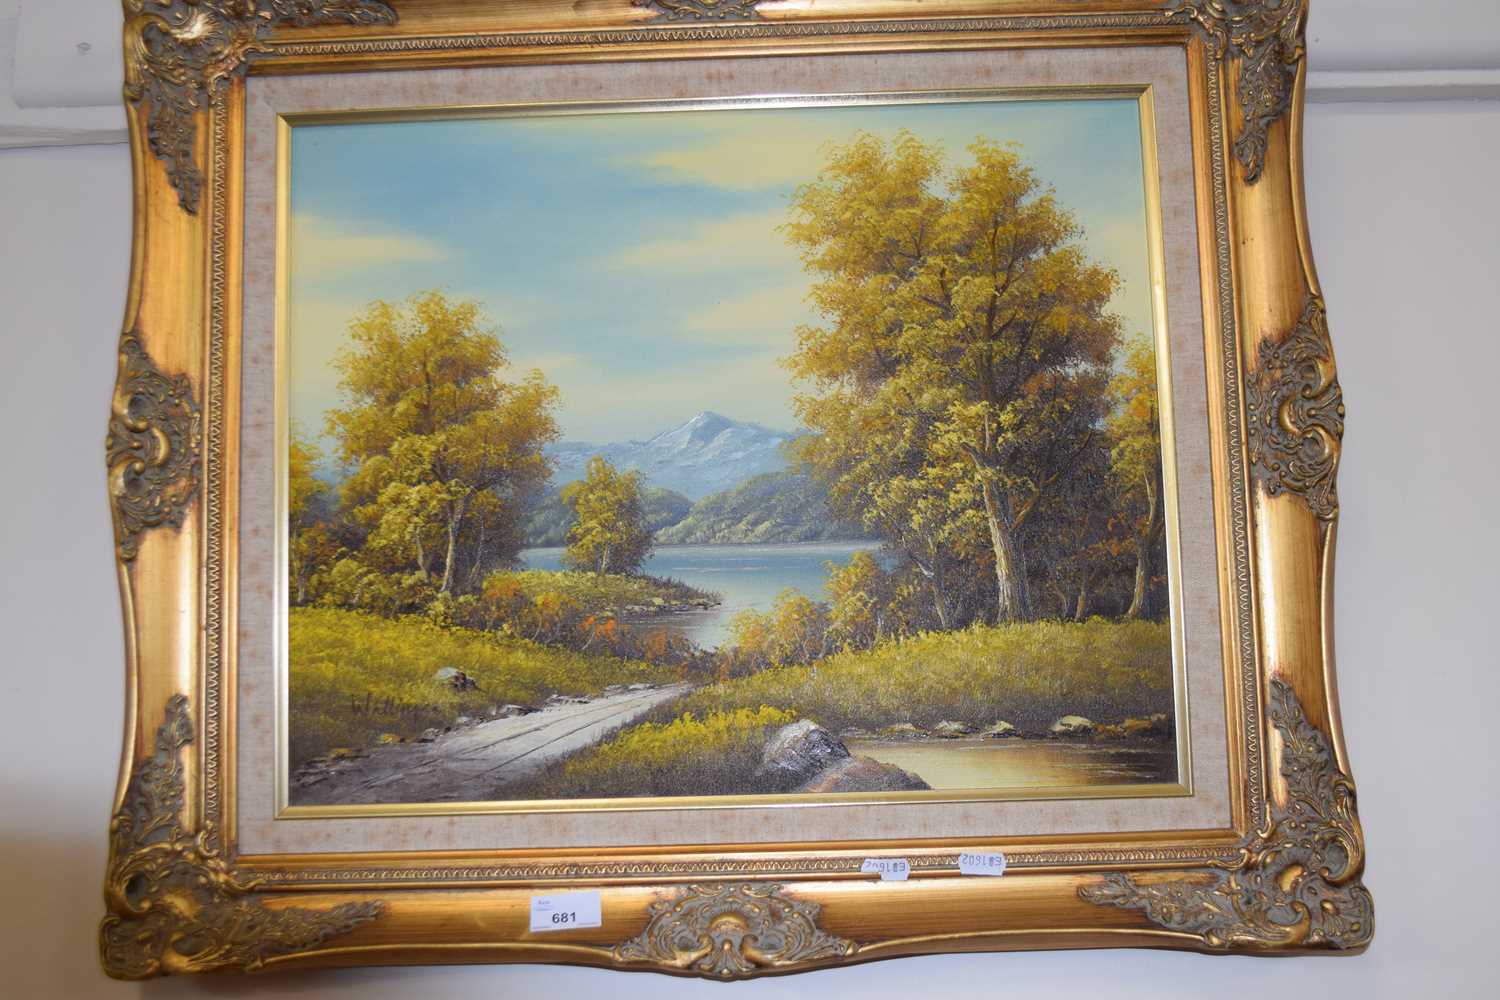 Lake and mountain scene, oil on canvas in modern gilt frame